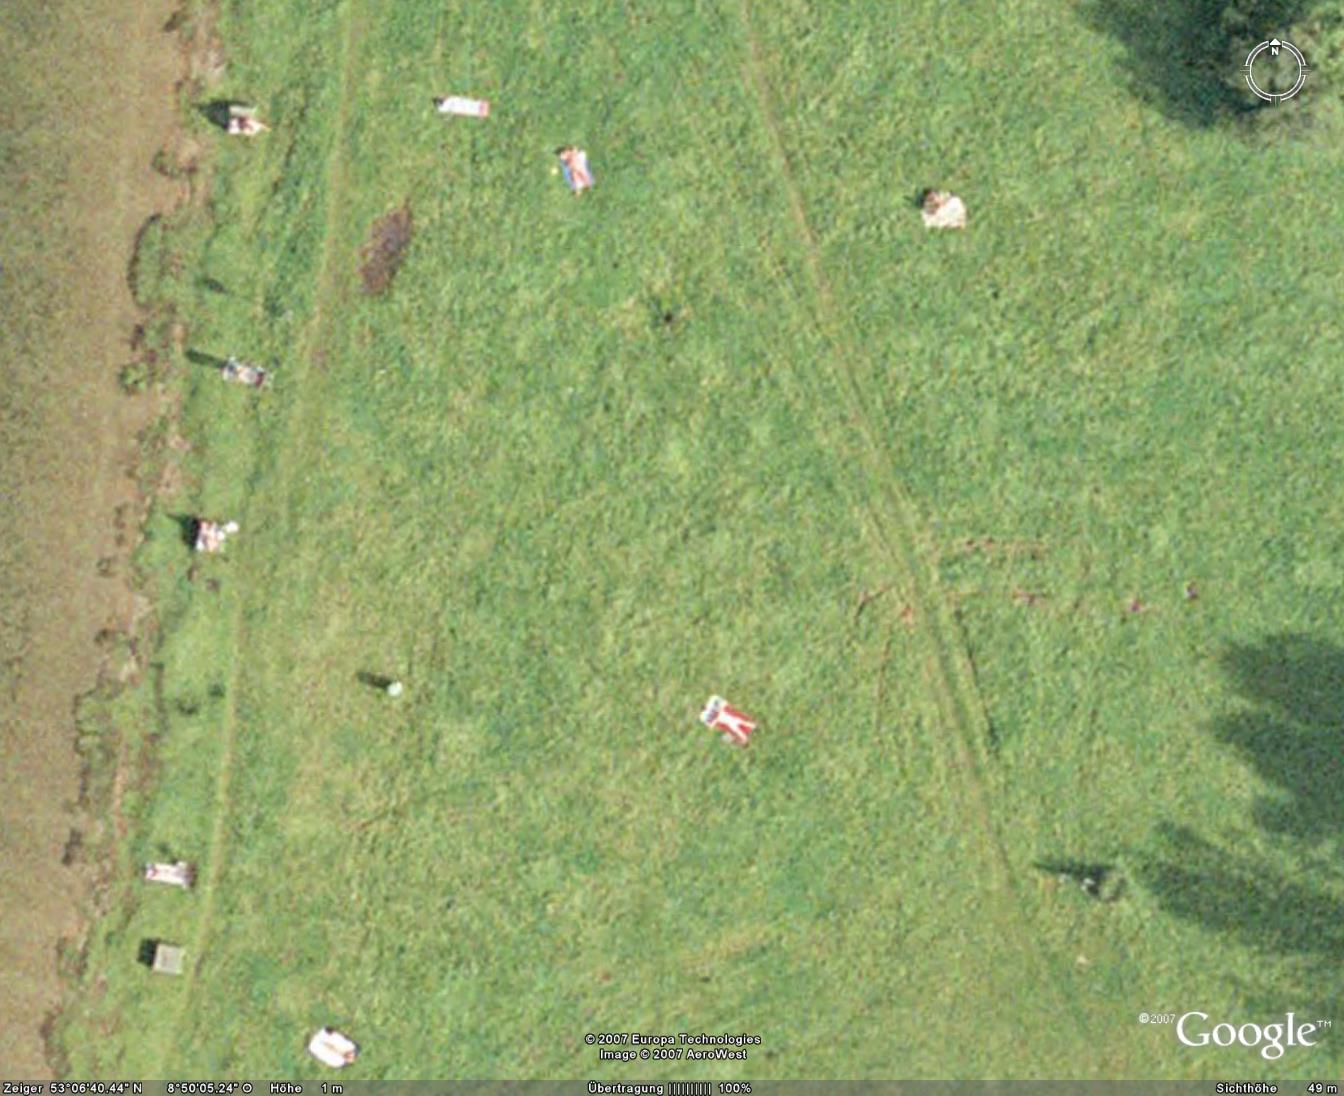 Nudes from google earth